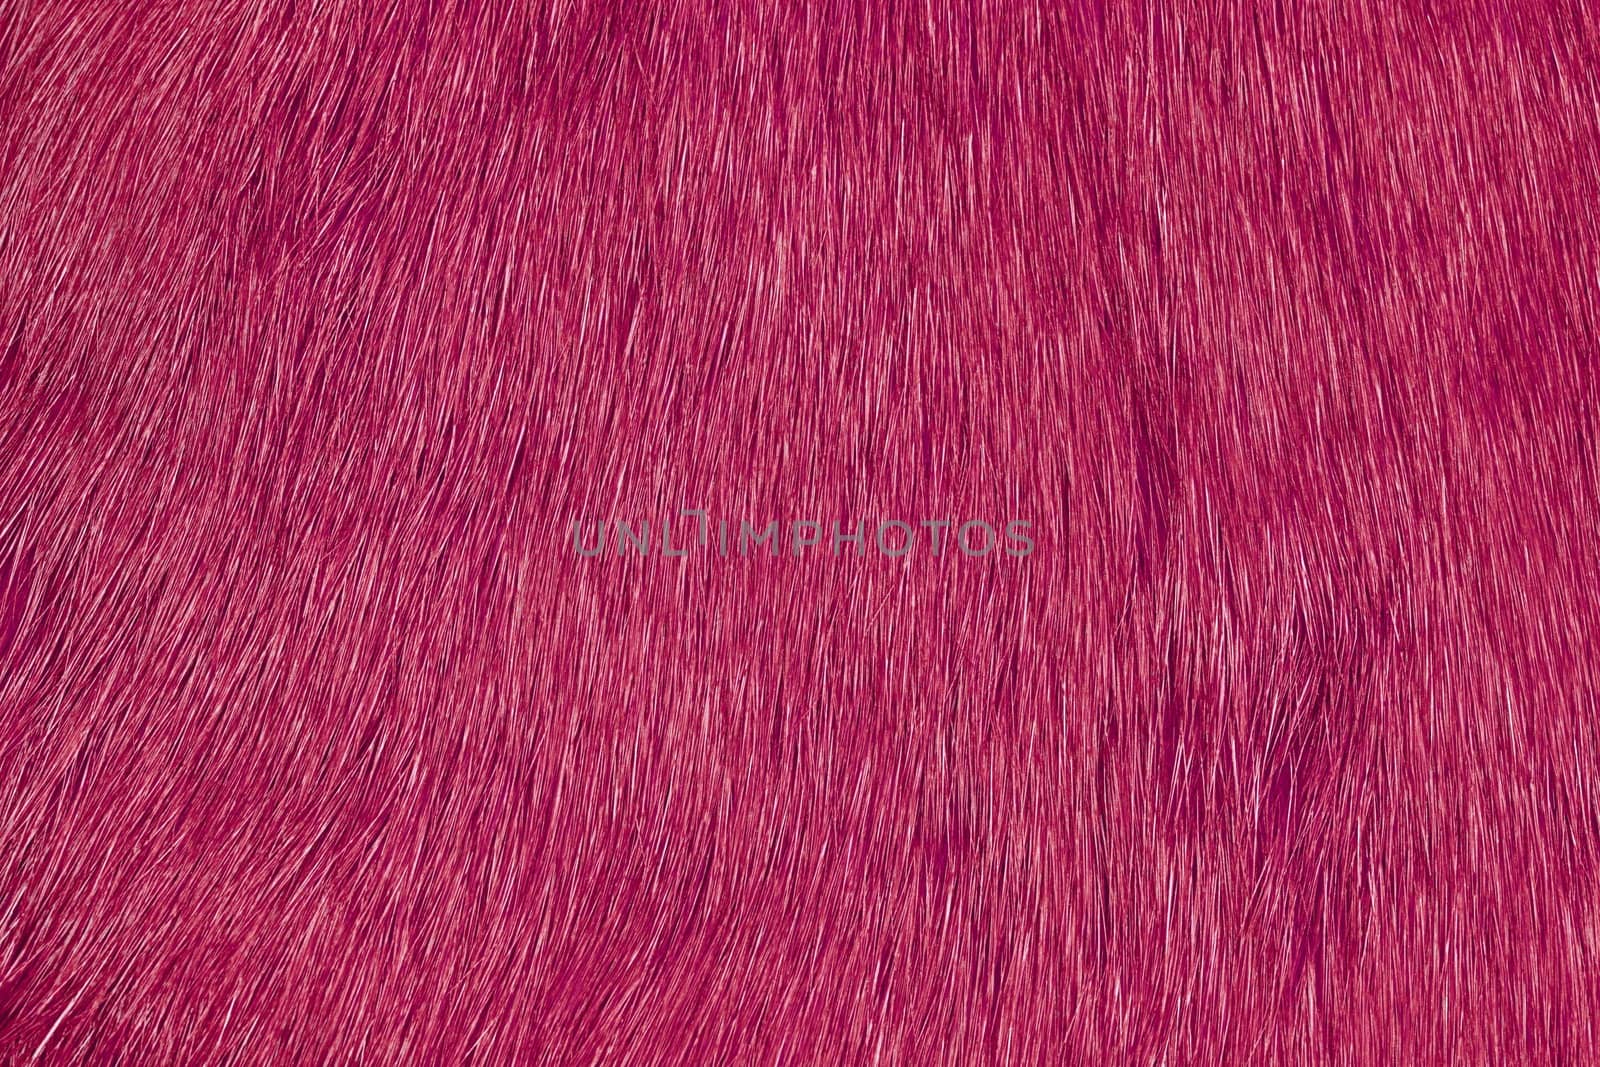 Pink fur macro picture for backgrounds.